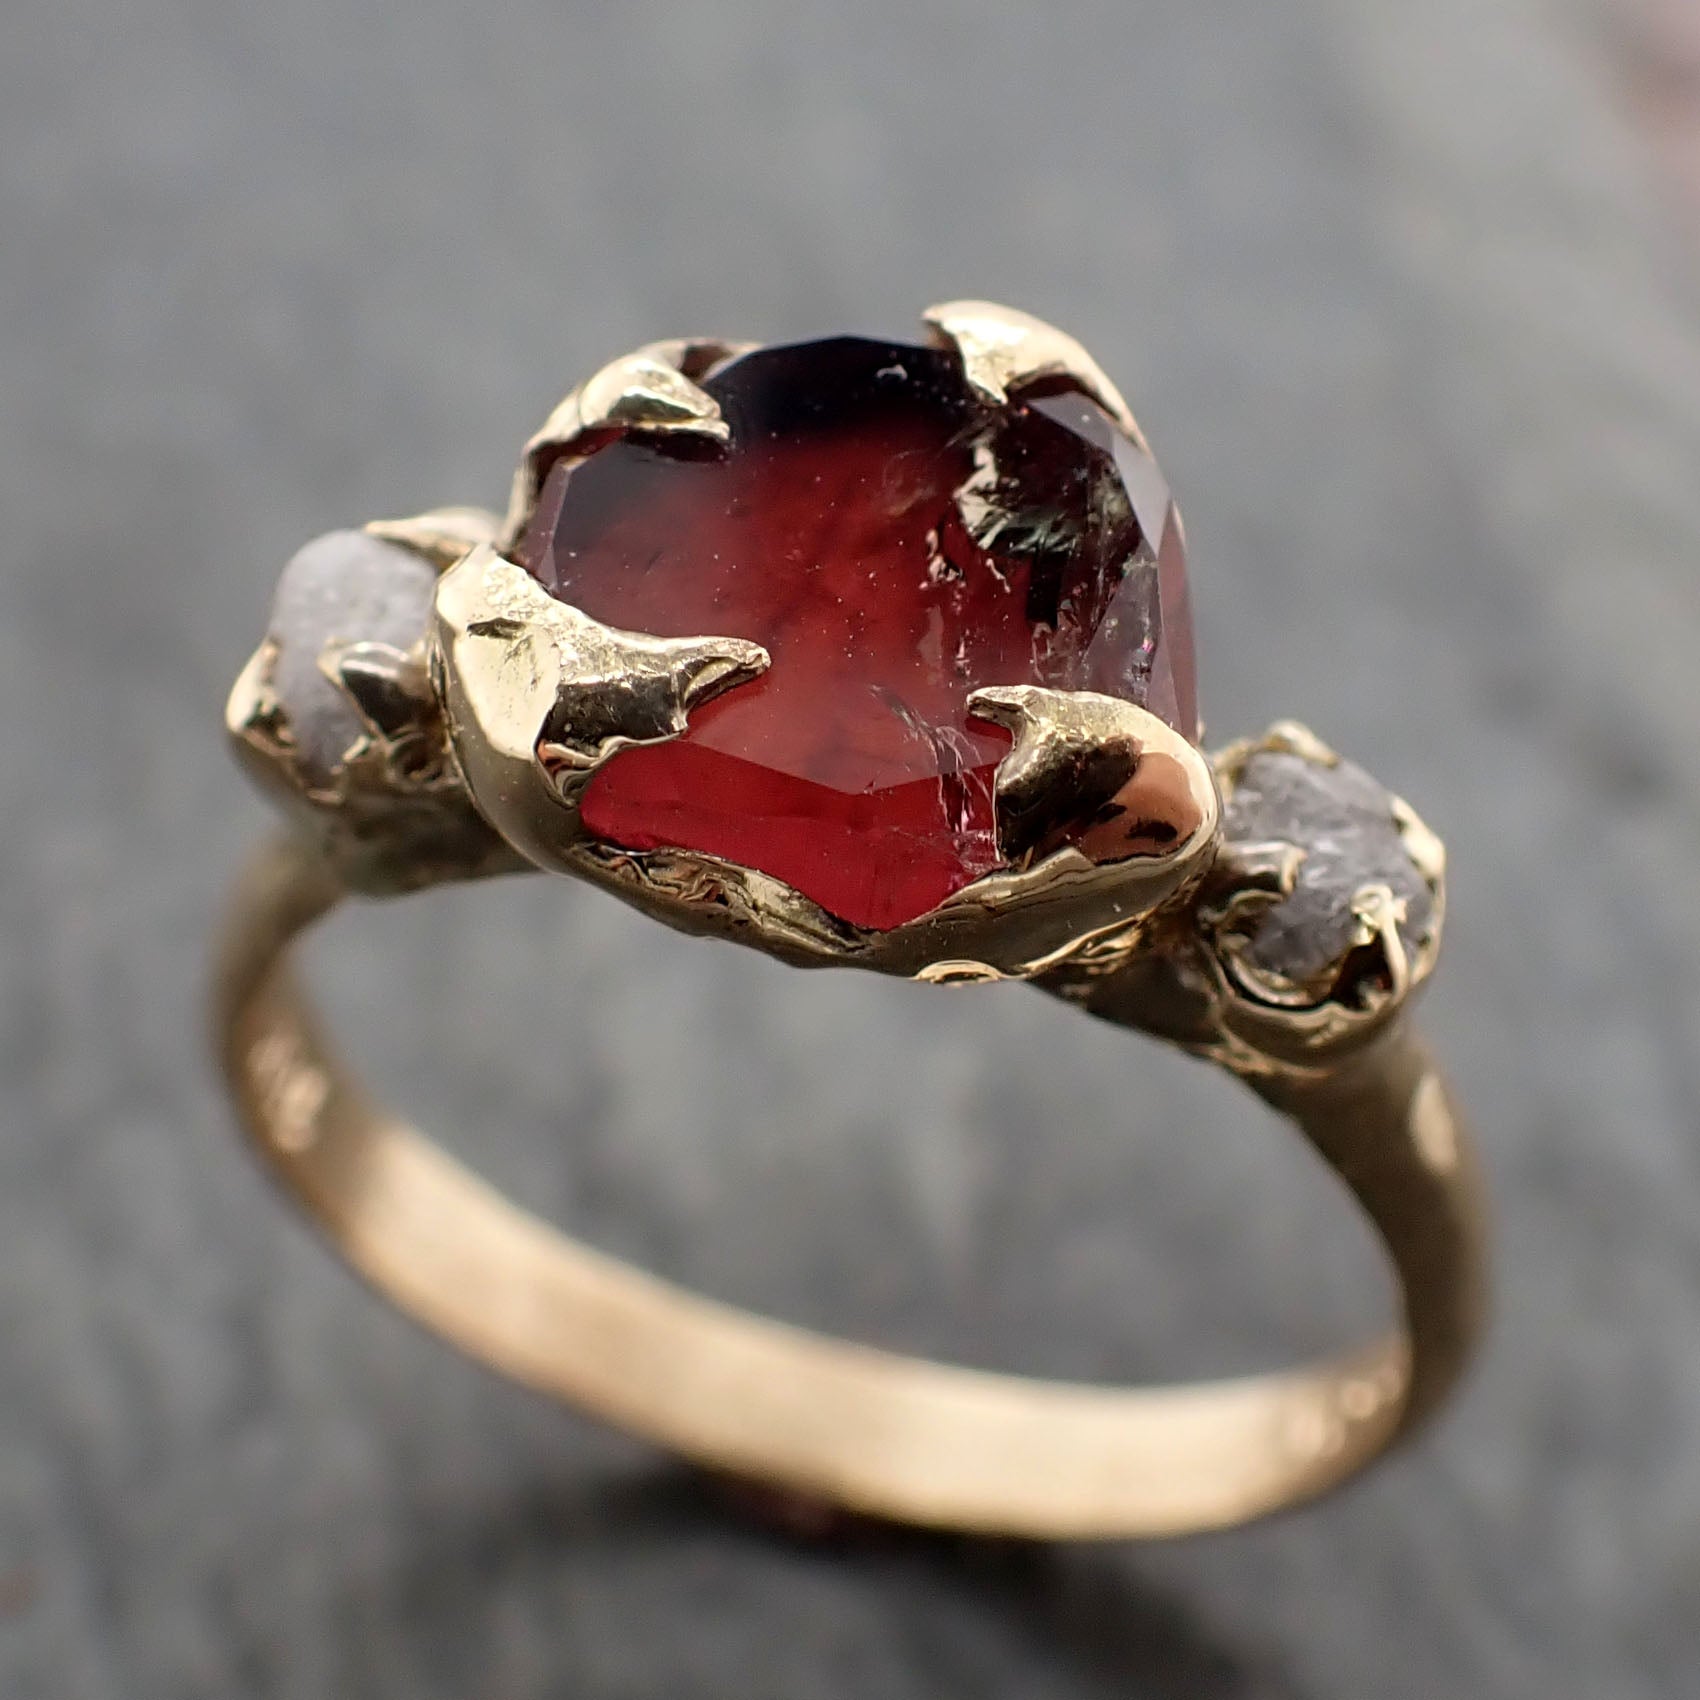 Partially faceted Hot Pink Tourmaline 18k Yellow Gold Engagement Ring One Of a Kind multi stone Gemstone Ring byAngeline 2358